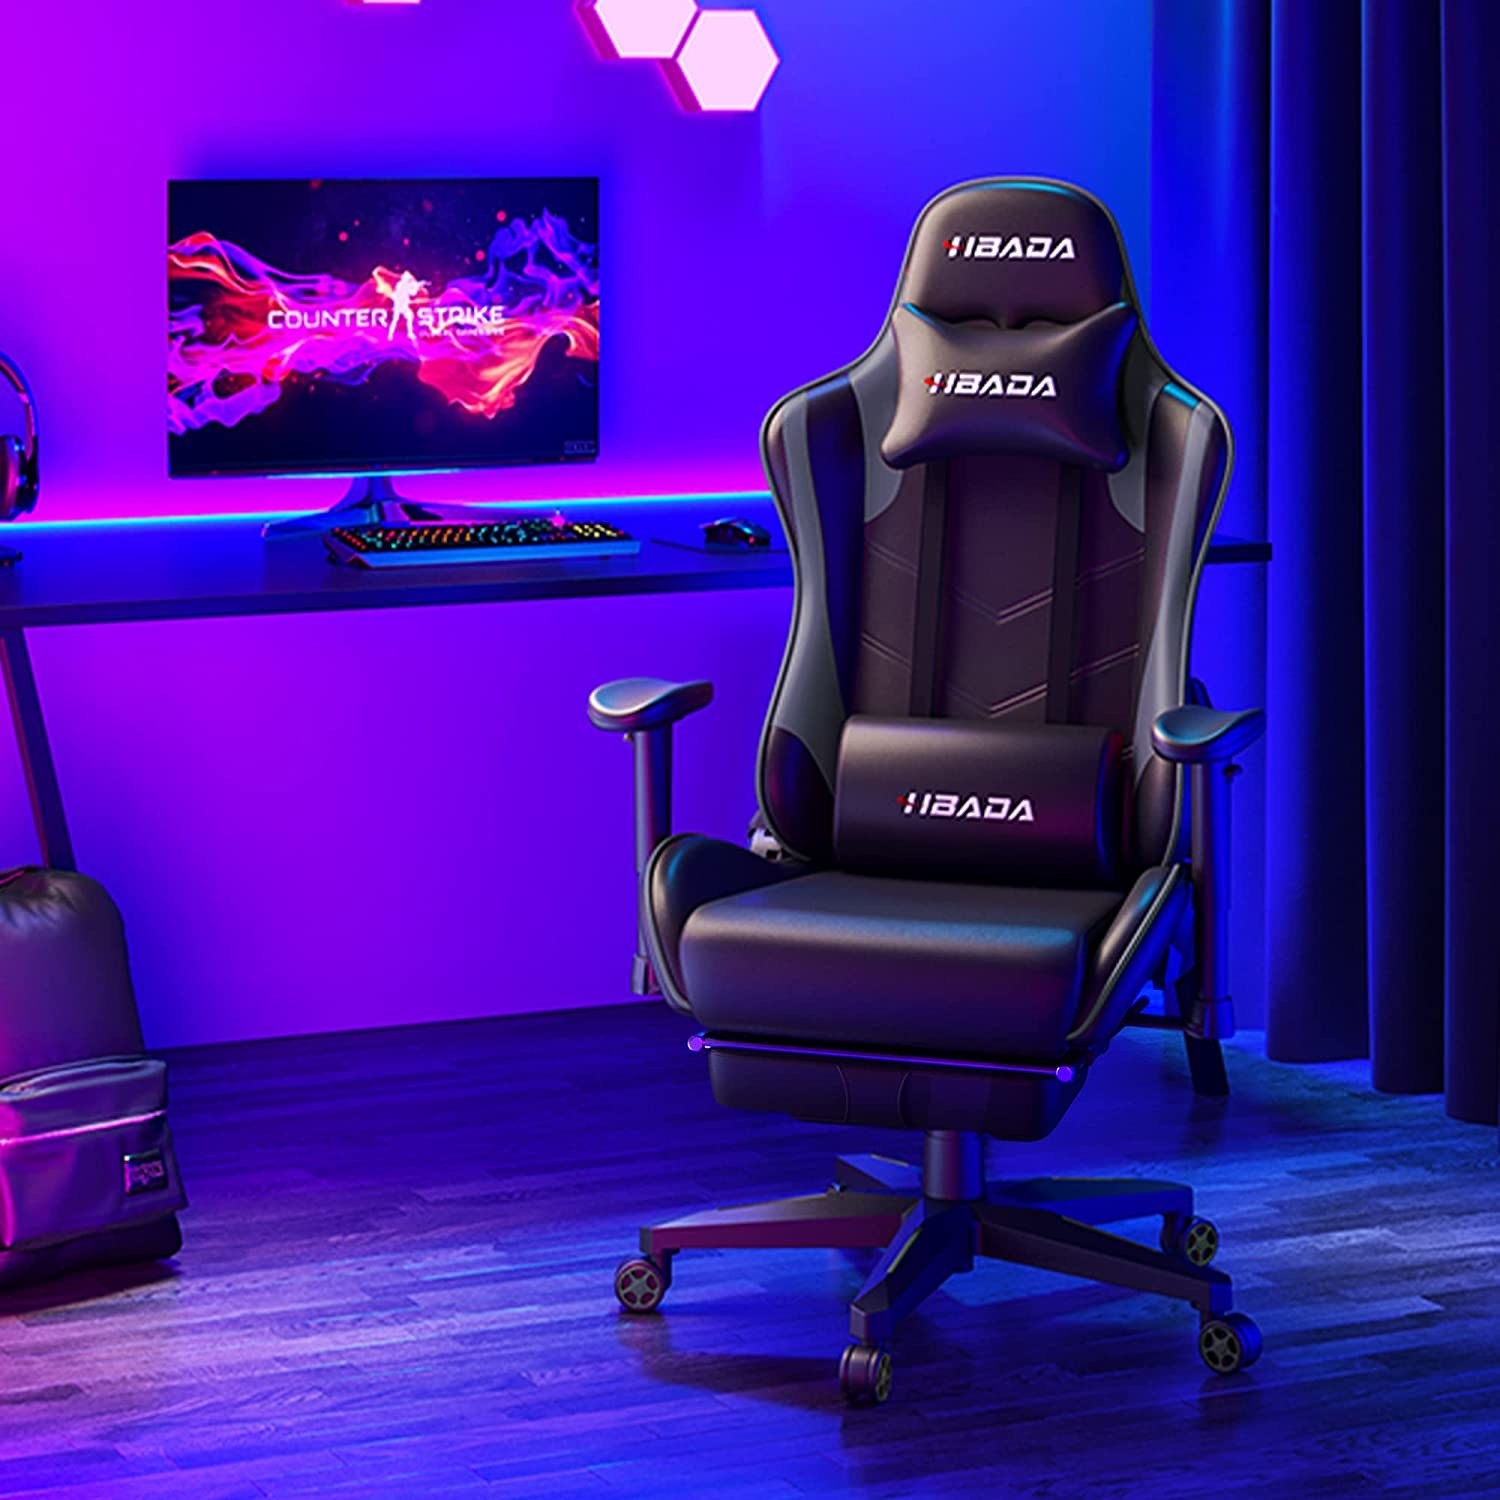 The black gaming chair